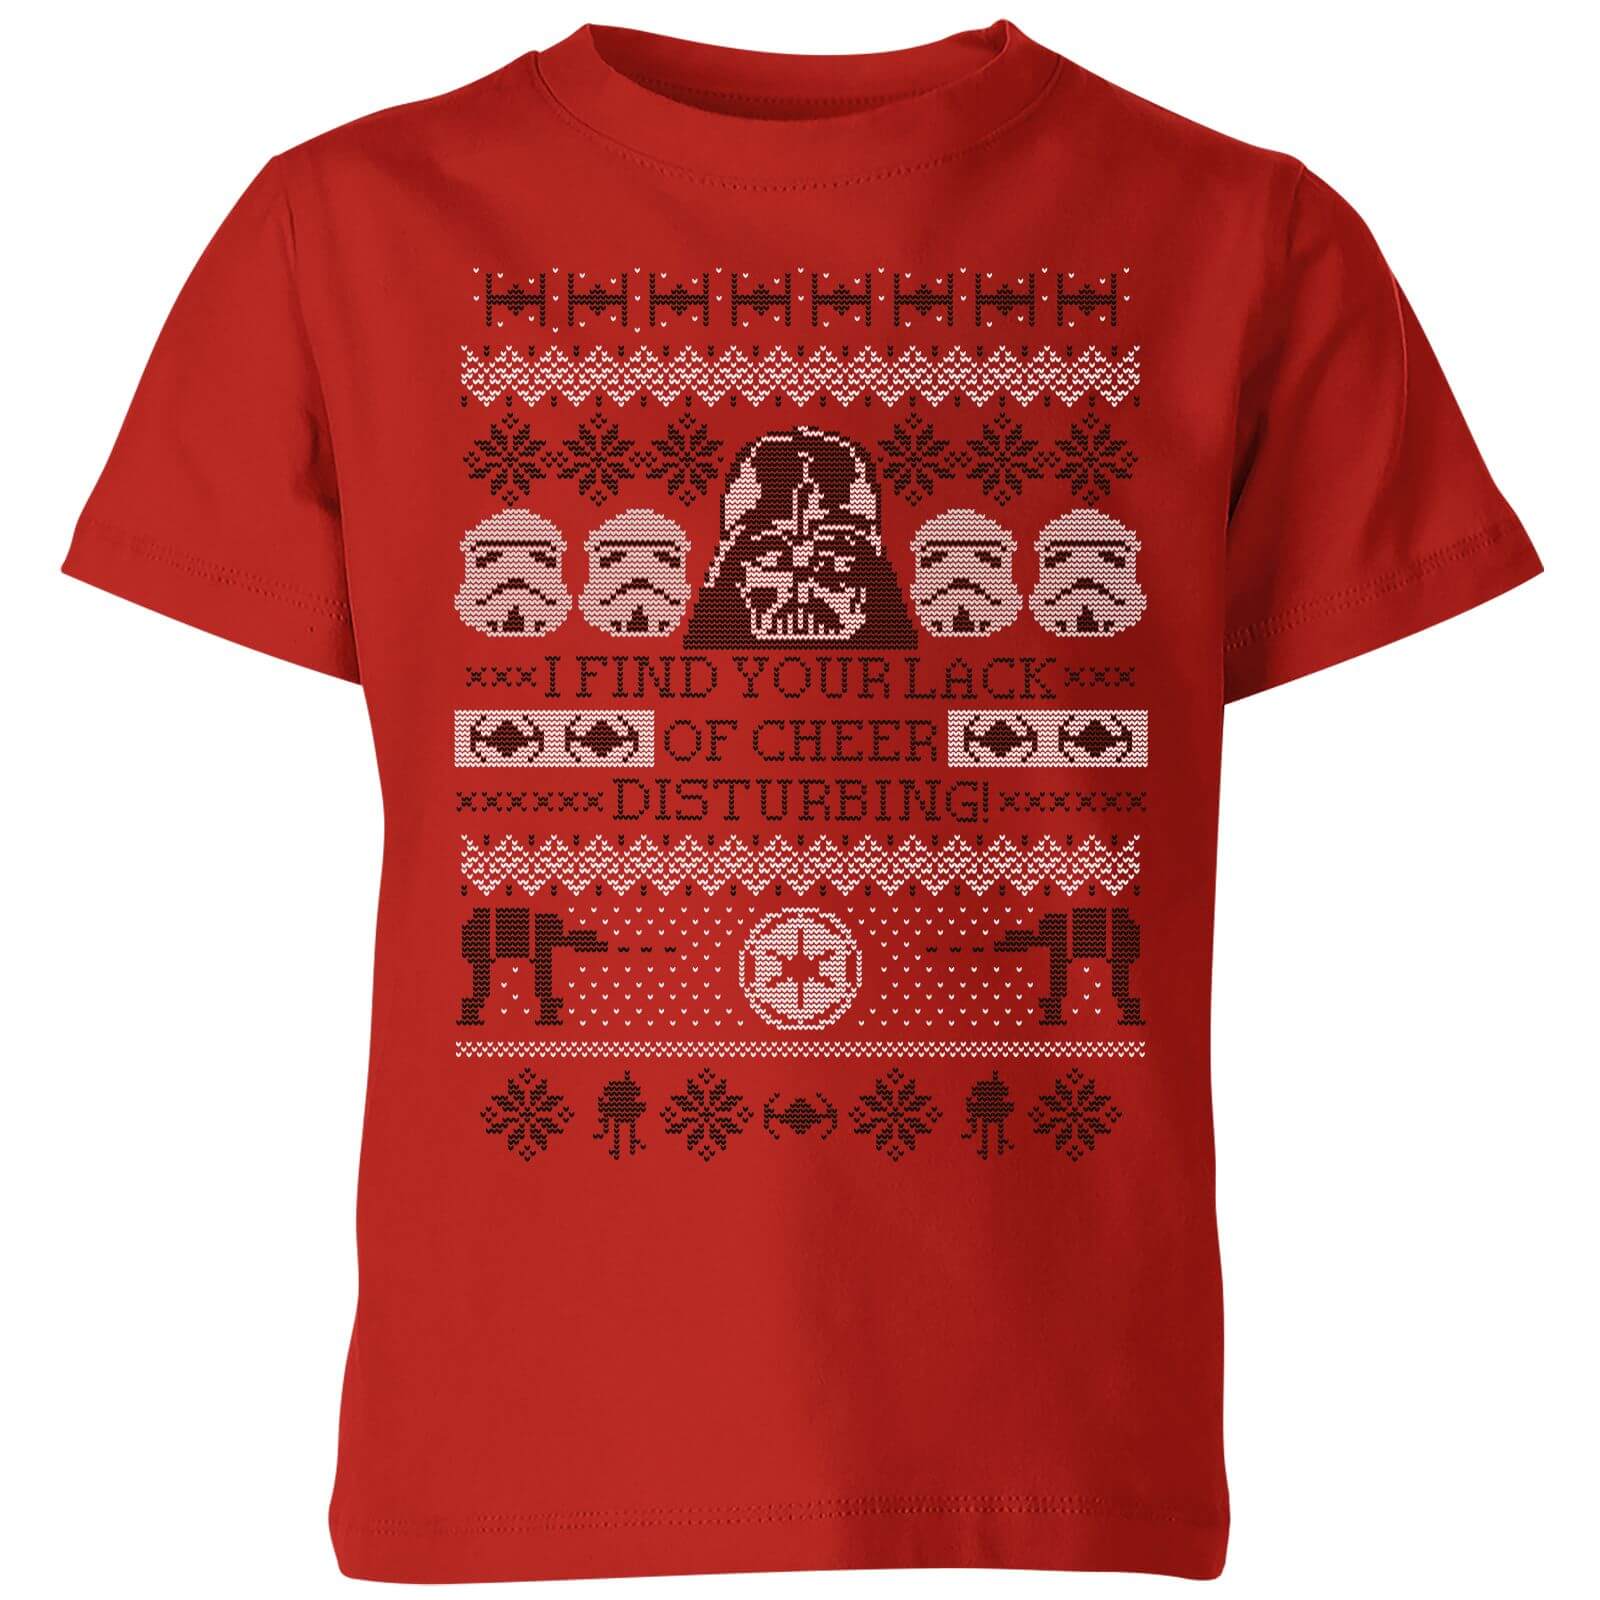 Star Wars I Find Your Lack Of Cheer Disturbing Kids Christmas T-Shirt - Red - 11-12 Years